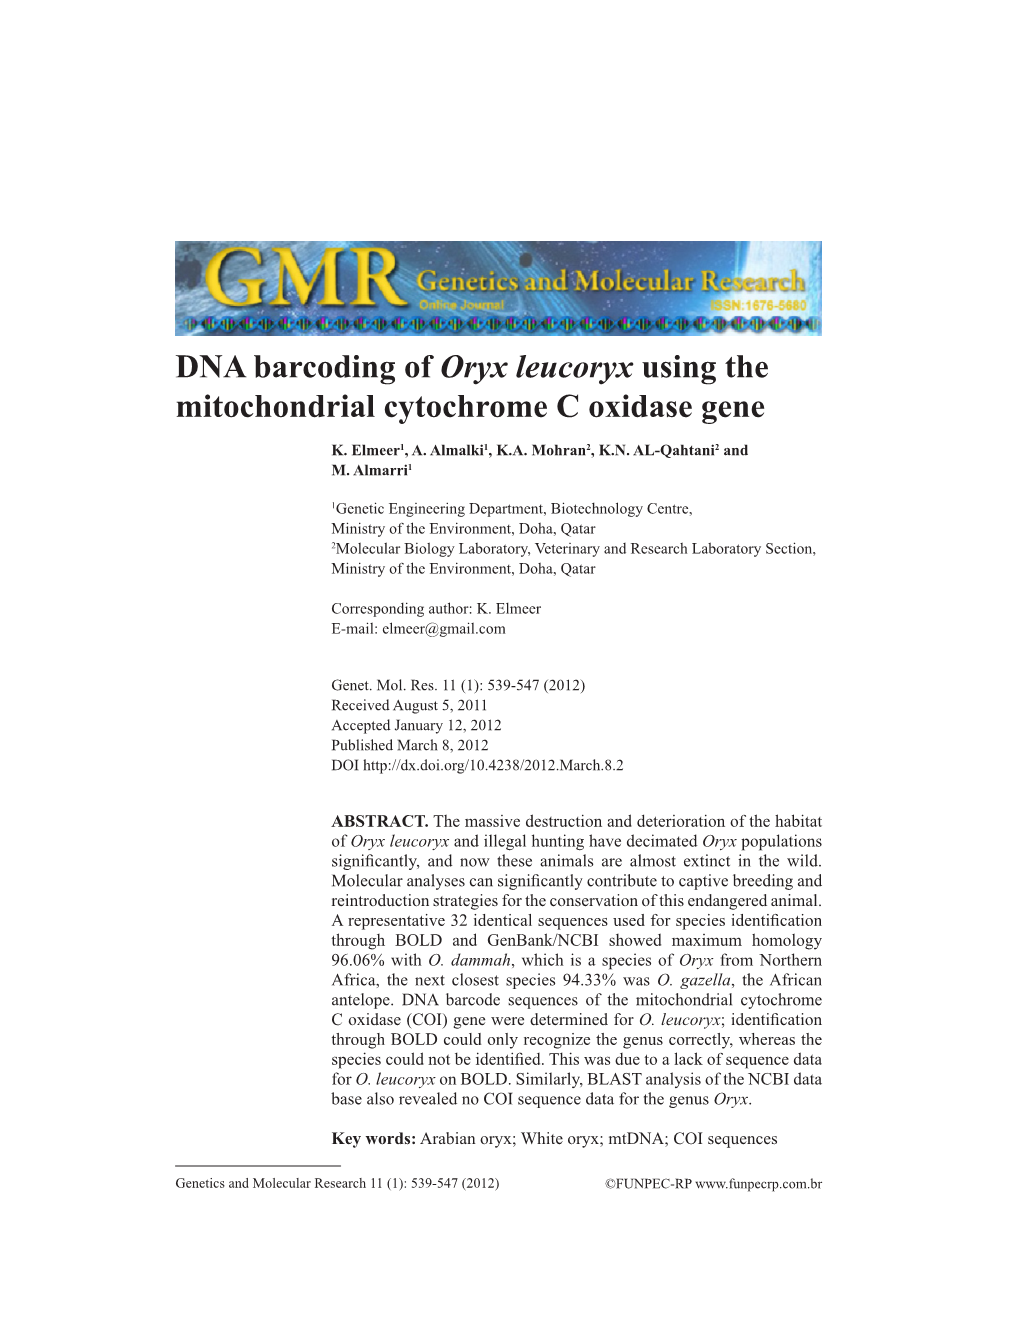 DNA Barcoding of Oryx Leucoryx Using the Mitochondrial Cytochrome C Oxidase Gene